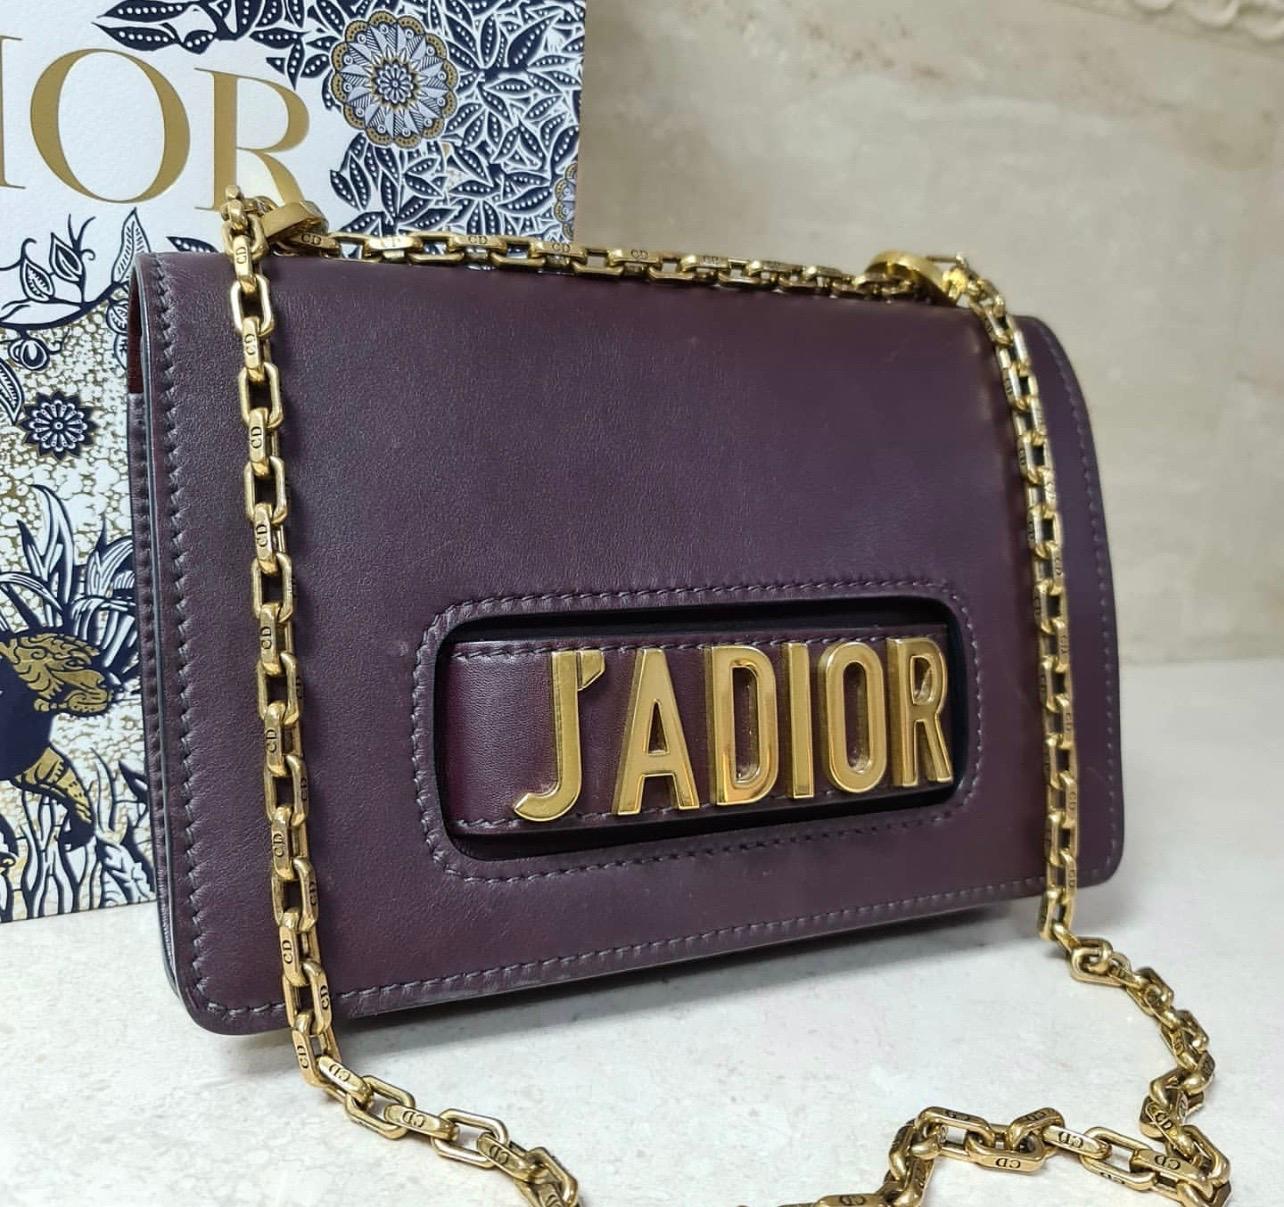 Originally debuting for Christian Dior's Spring 2017 collection, comes this new J'ADIOR shoulder bag.
Featuring a dark red smooth calfskin leather, the bag has a brand new bold logo with a slot hand clasp. The bag has a long chain strap and spacious